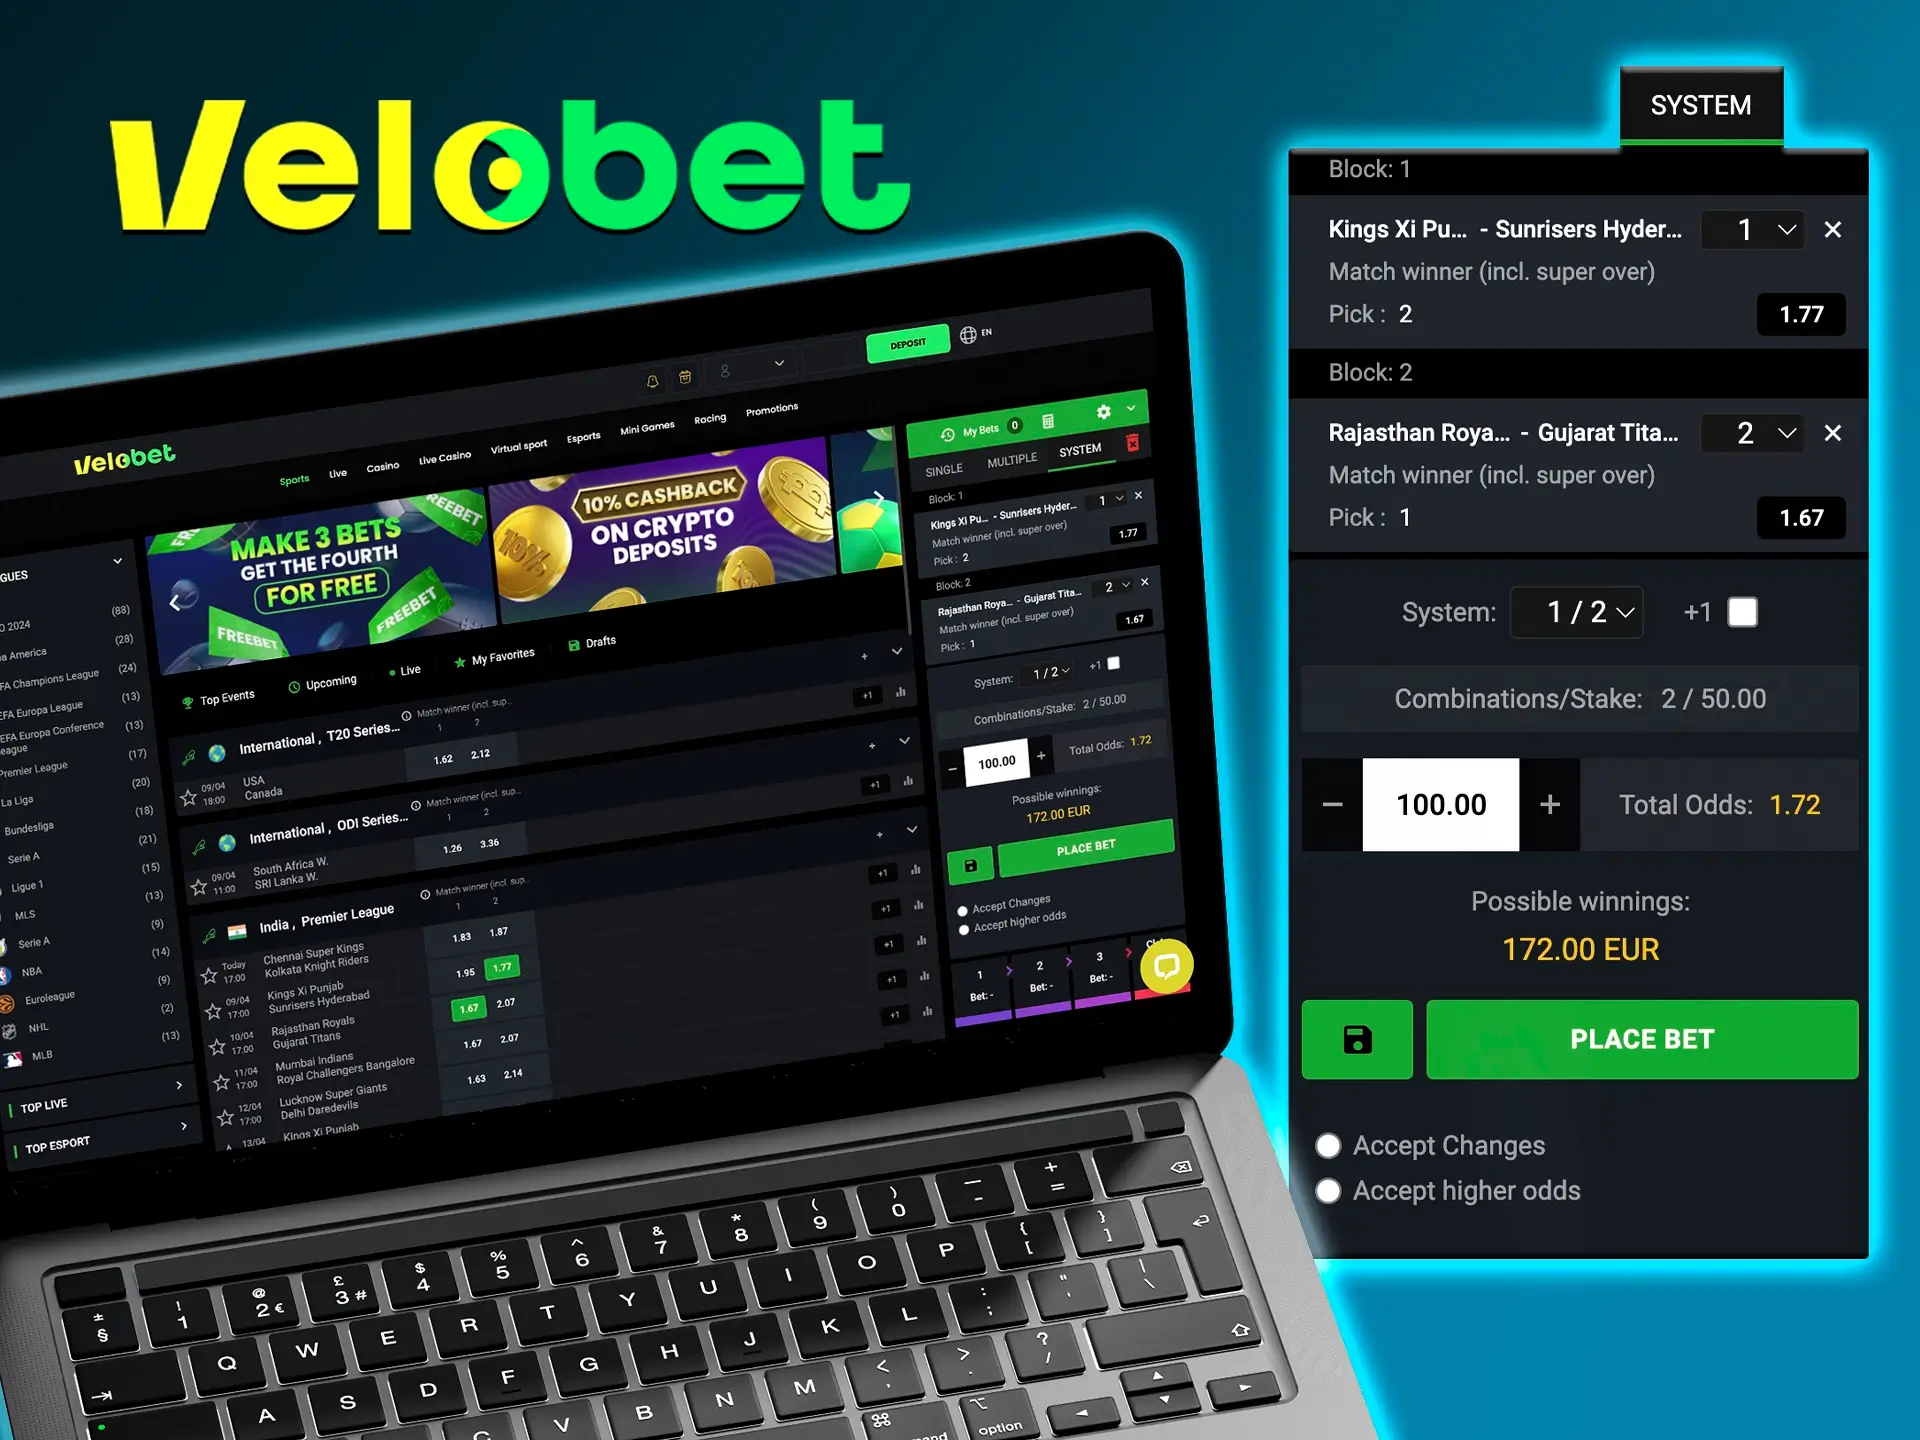 Bet at Velobet through the system if you are in doubt about one of your match outcomes.